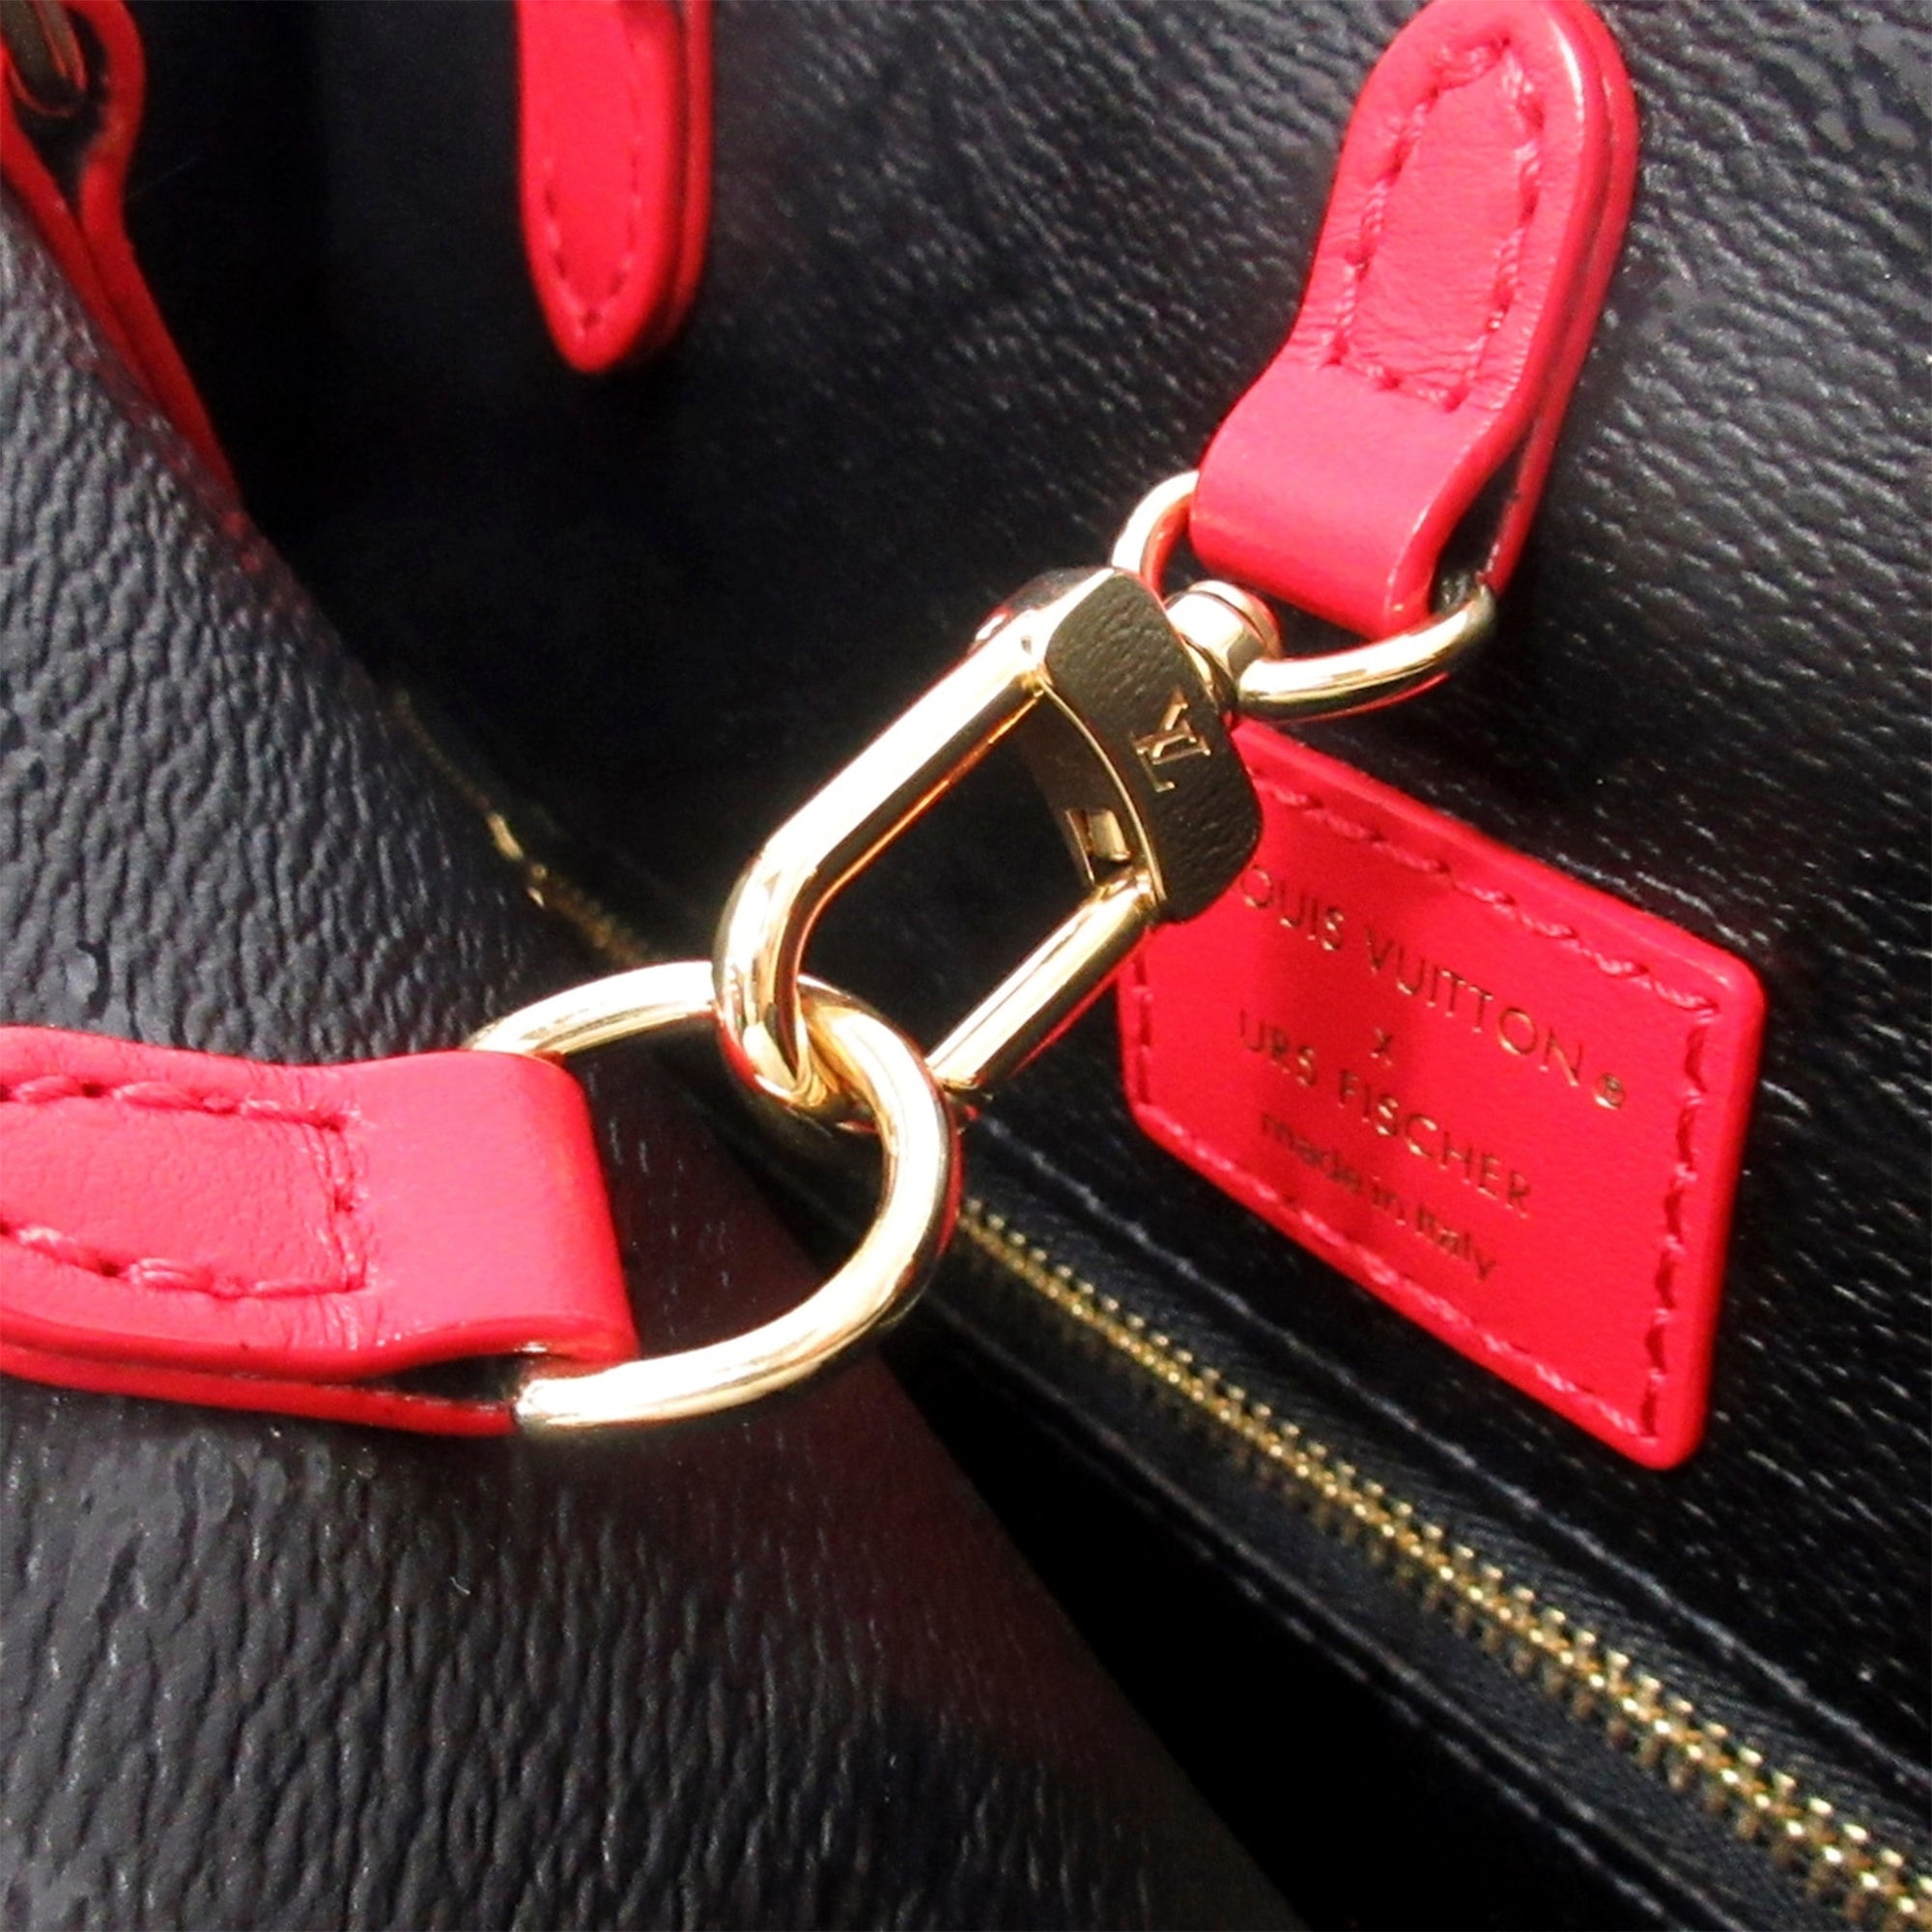 Louis Vuitton “Urs Fischer Red” On The Go GM – The Luxury Lady